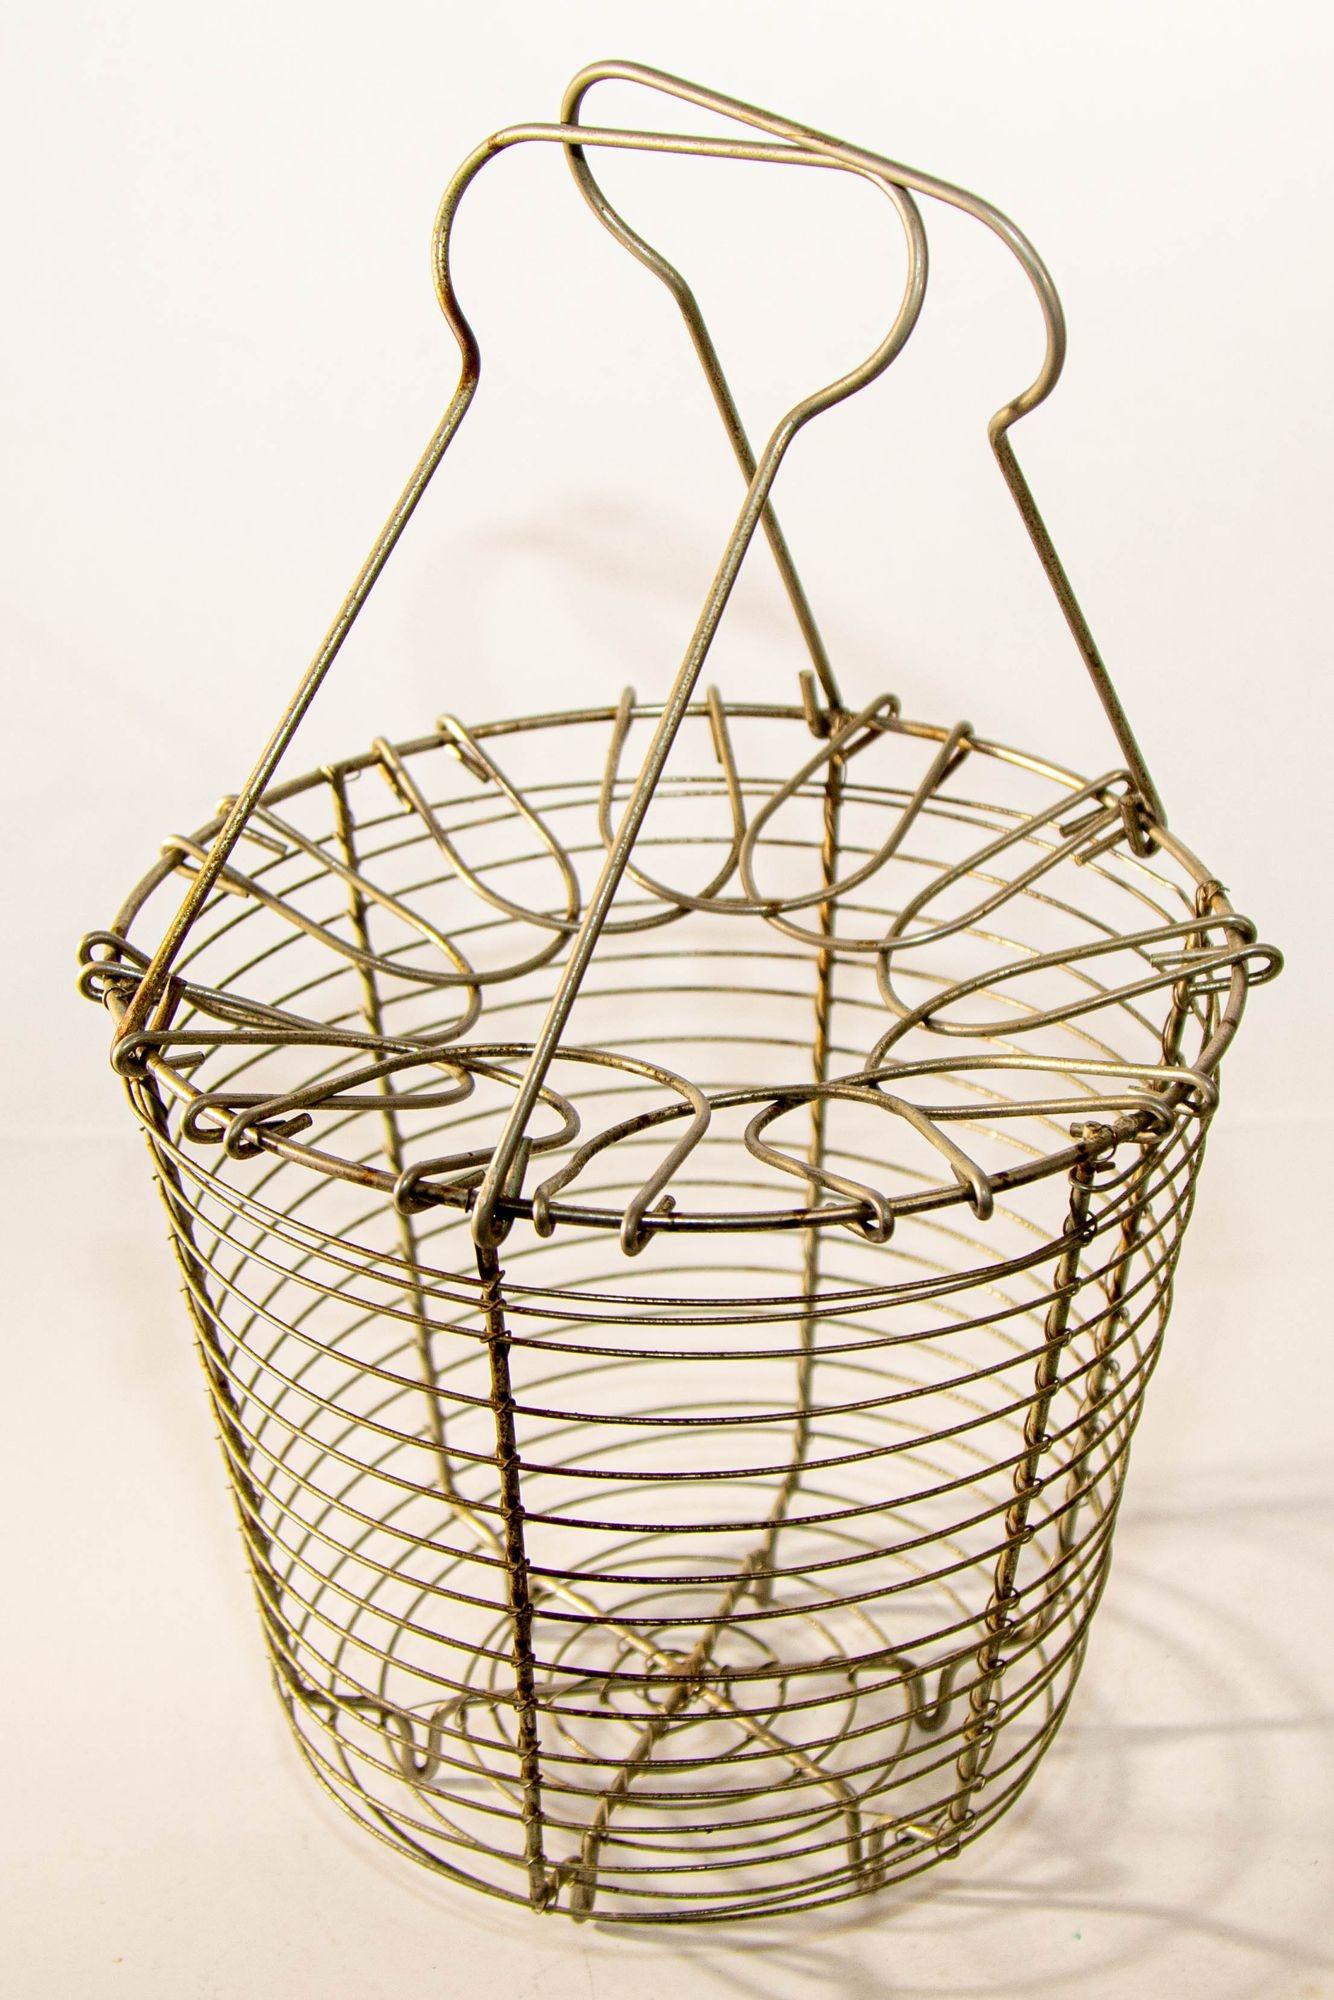 20th Century Antique Metal Wire Egg Basket Rustic French Farmhouse Decor For Sale